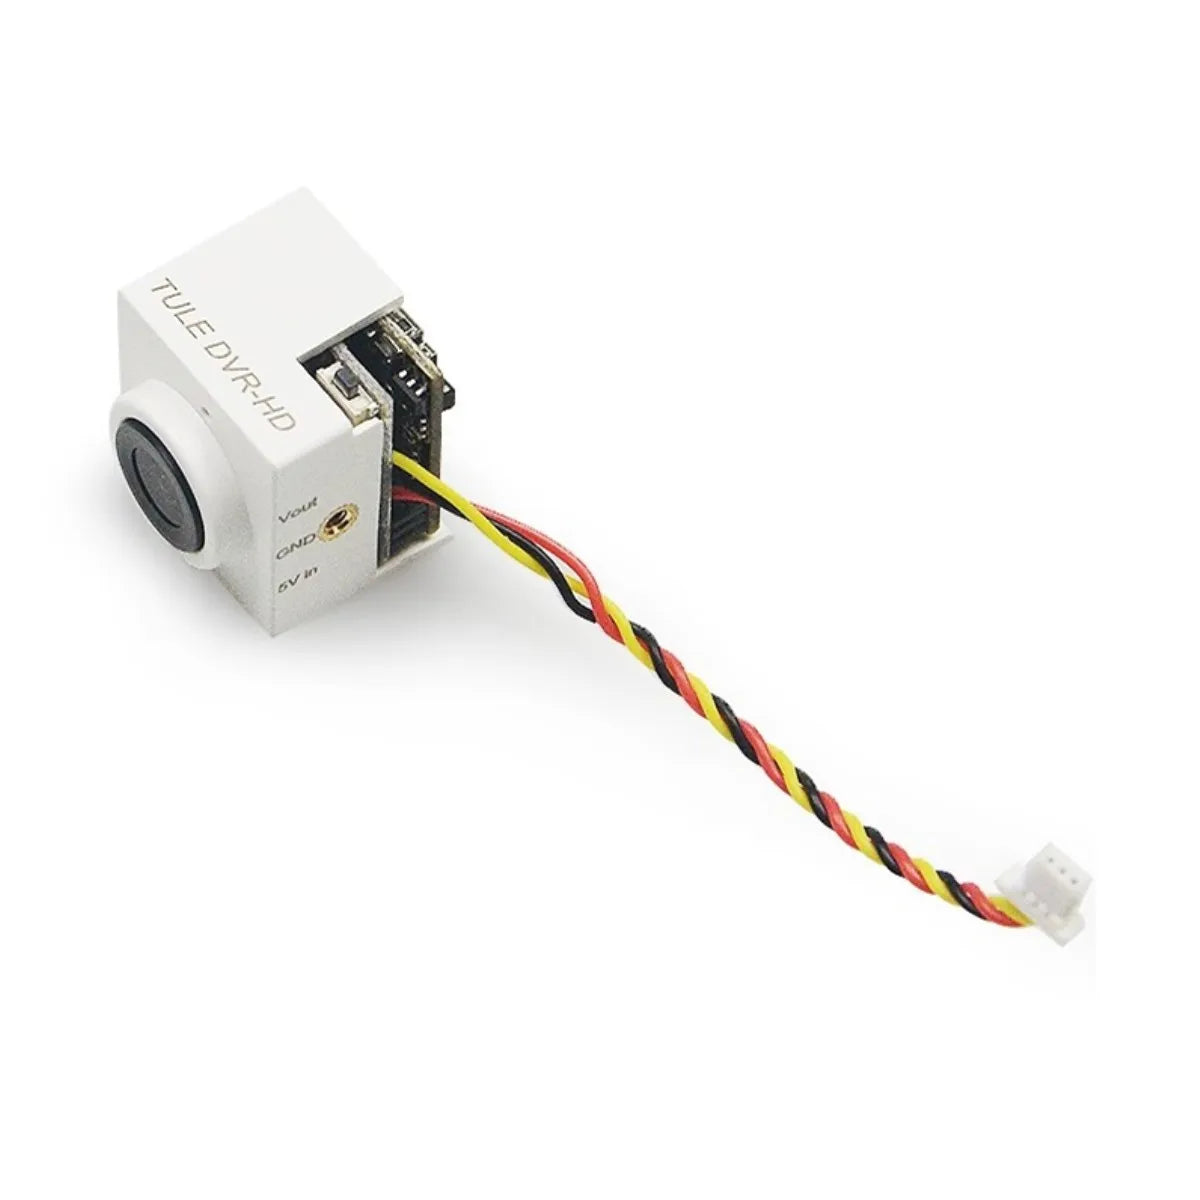 TULE 720P 170 Wide Angle Micro Mini Camera, Feature Recordable with a microphone camera to be installed on any of your drones